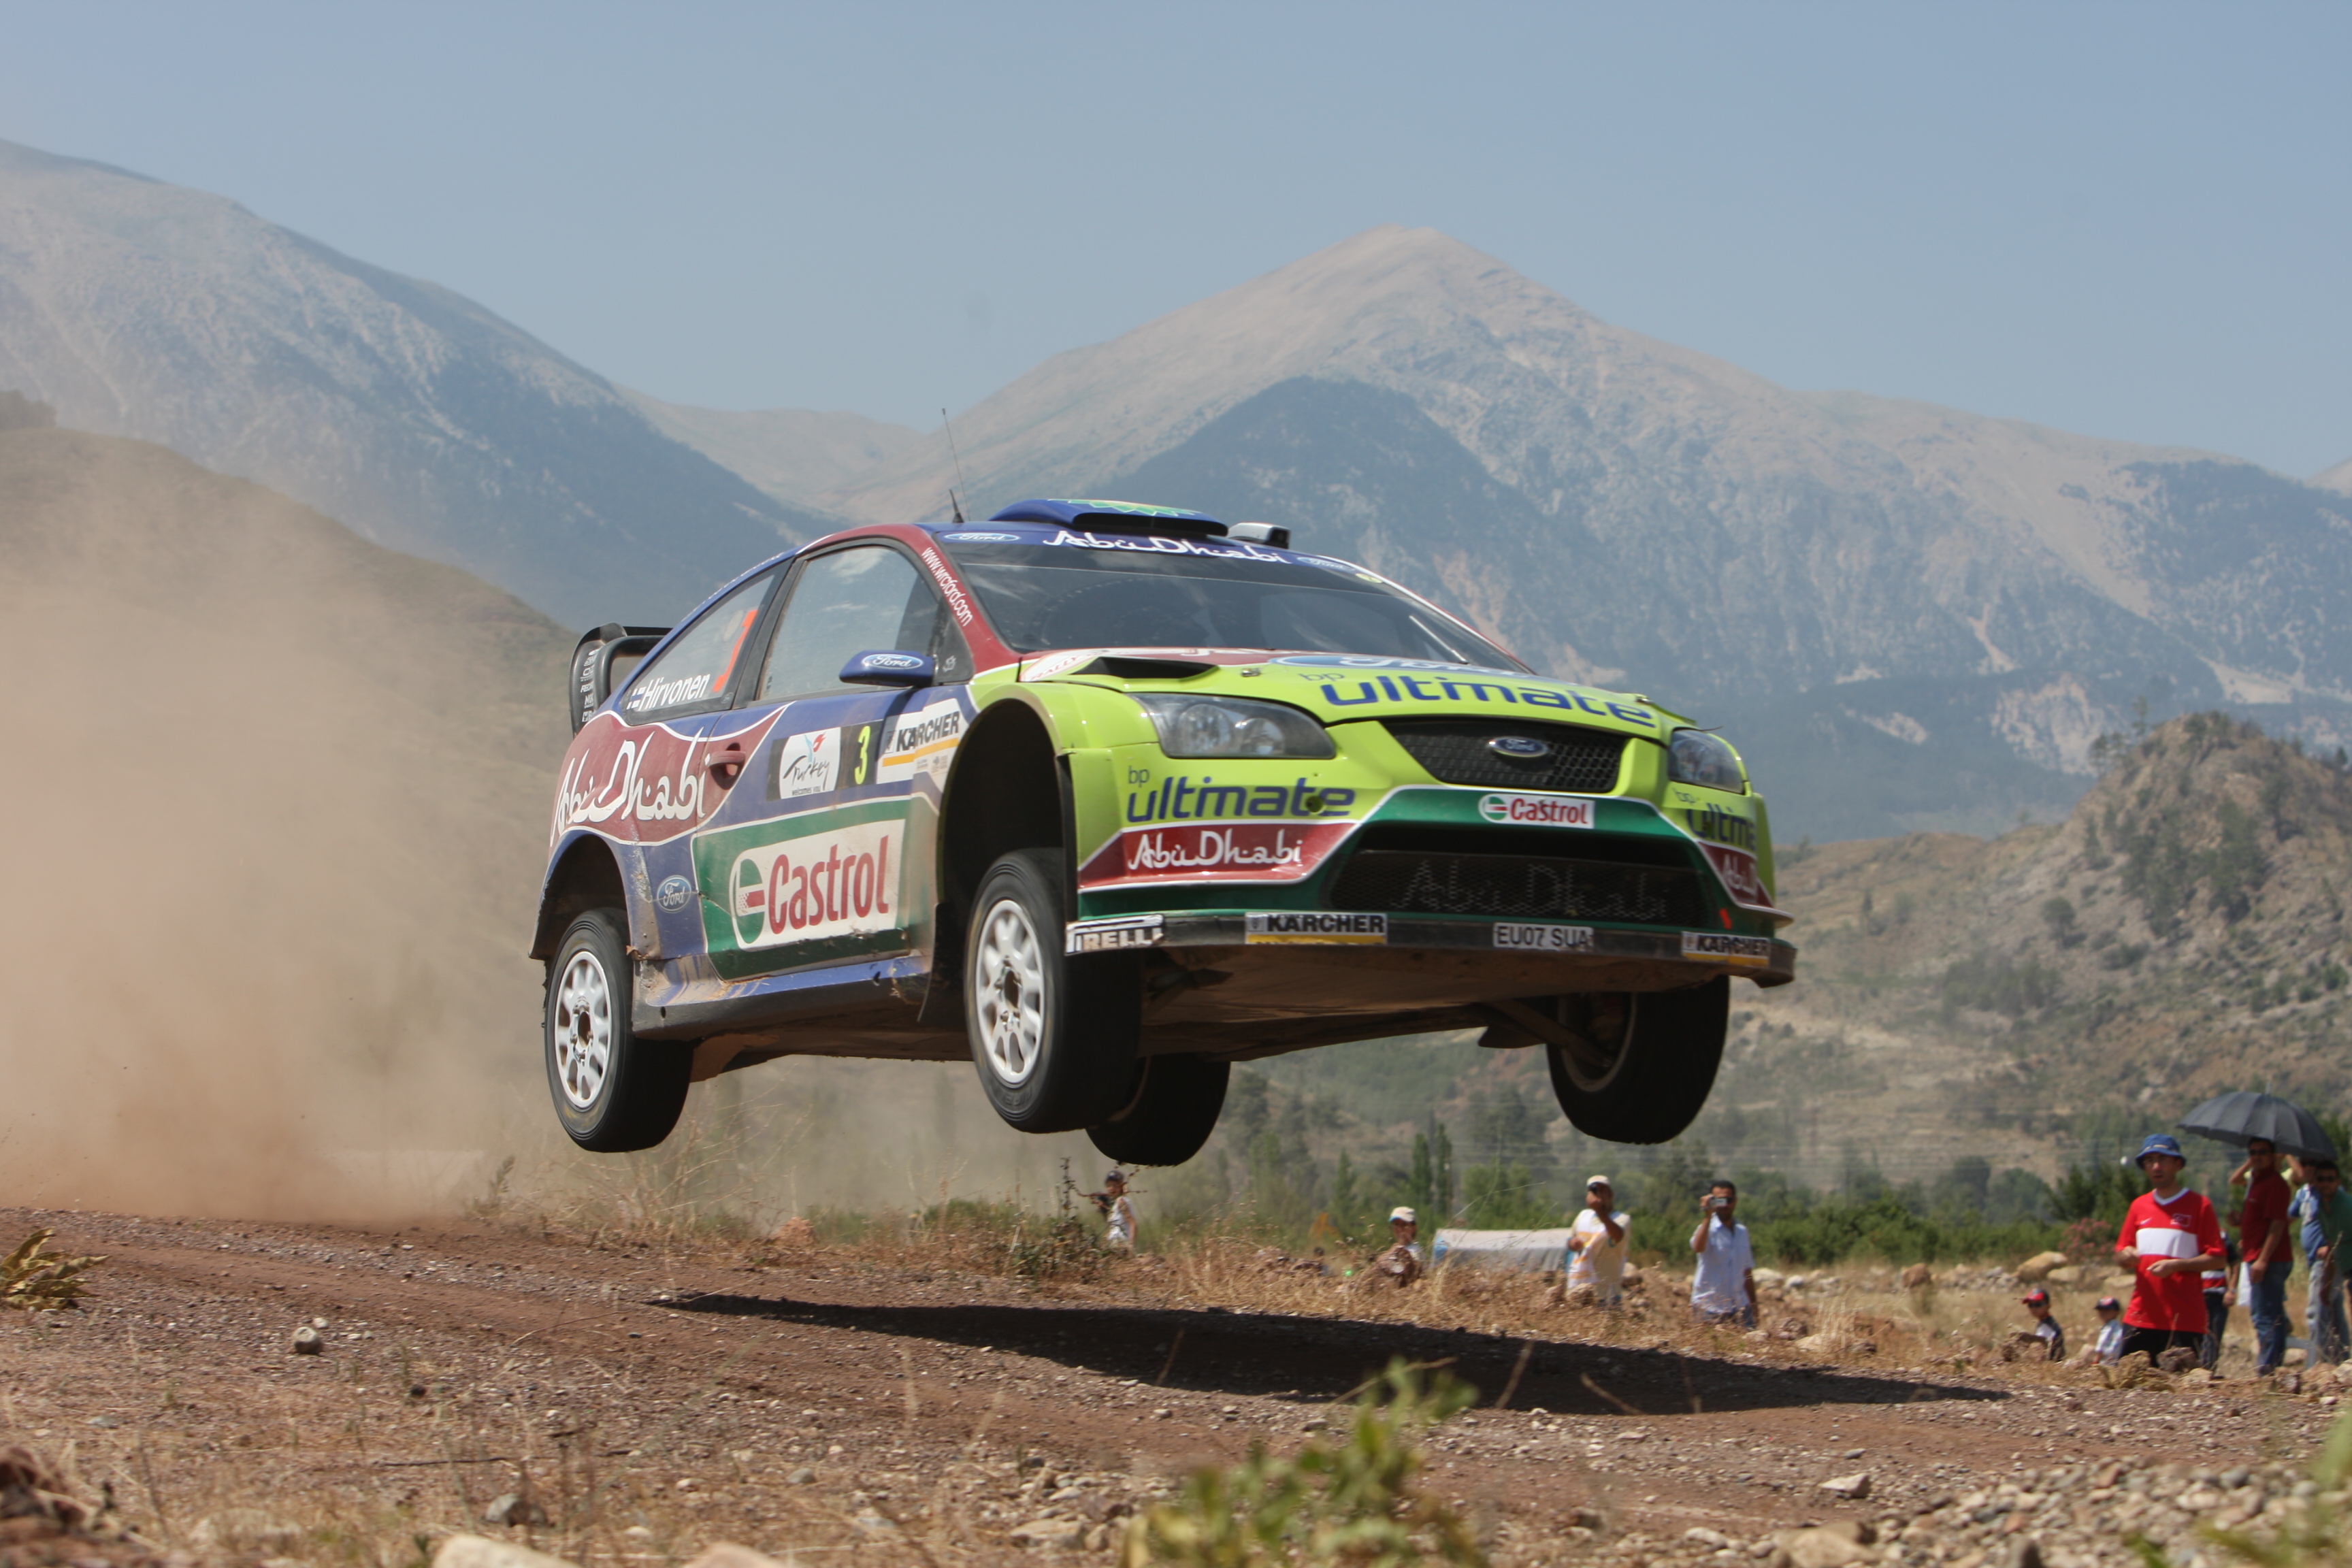 mountains, cars, jumping, dust, rally, airborne, racing, Ford racing, races, rally cars, offroad, gravel, Ford Focus WRC, racing cars, jump - desktop wallpaper